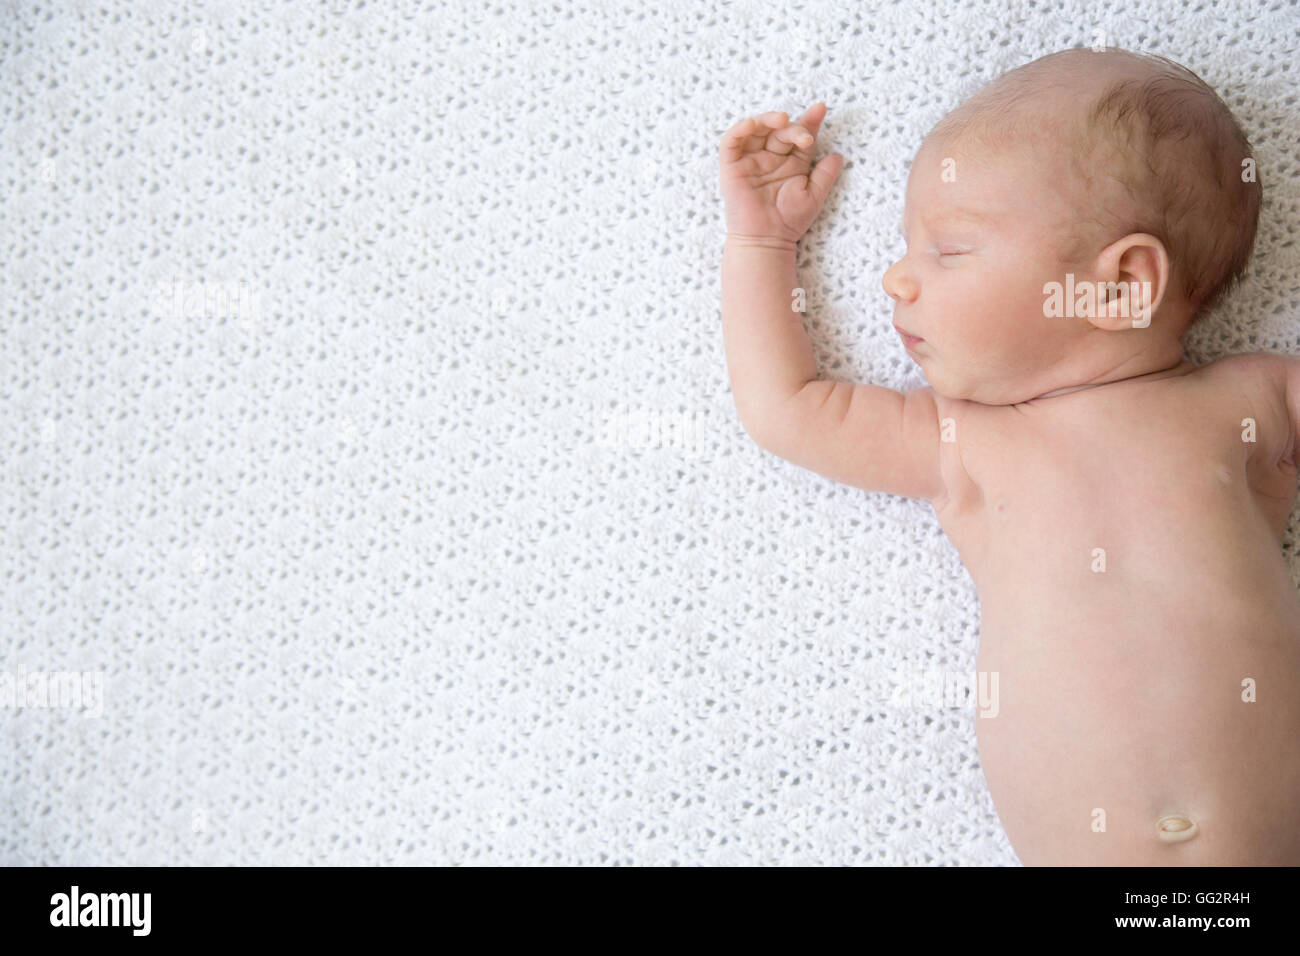 Closeup portrait of young funny newborn babe napping on white knitted blanket. Sleeping adorable new born child. Healthy little Stock Photo